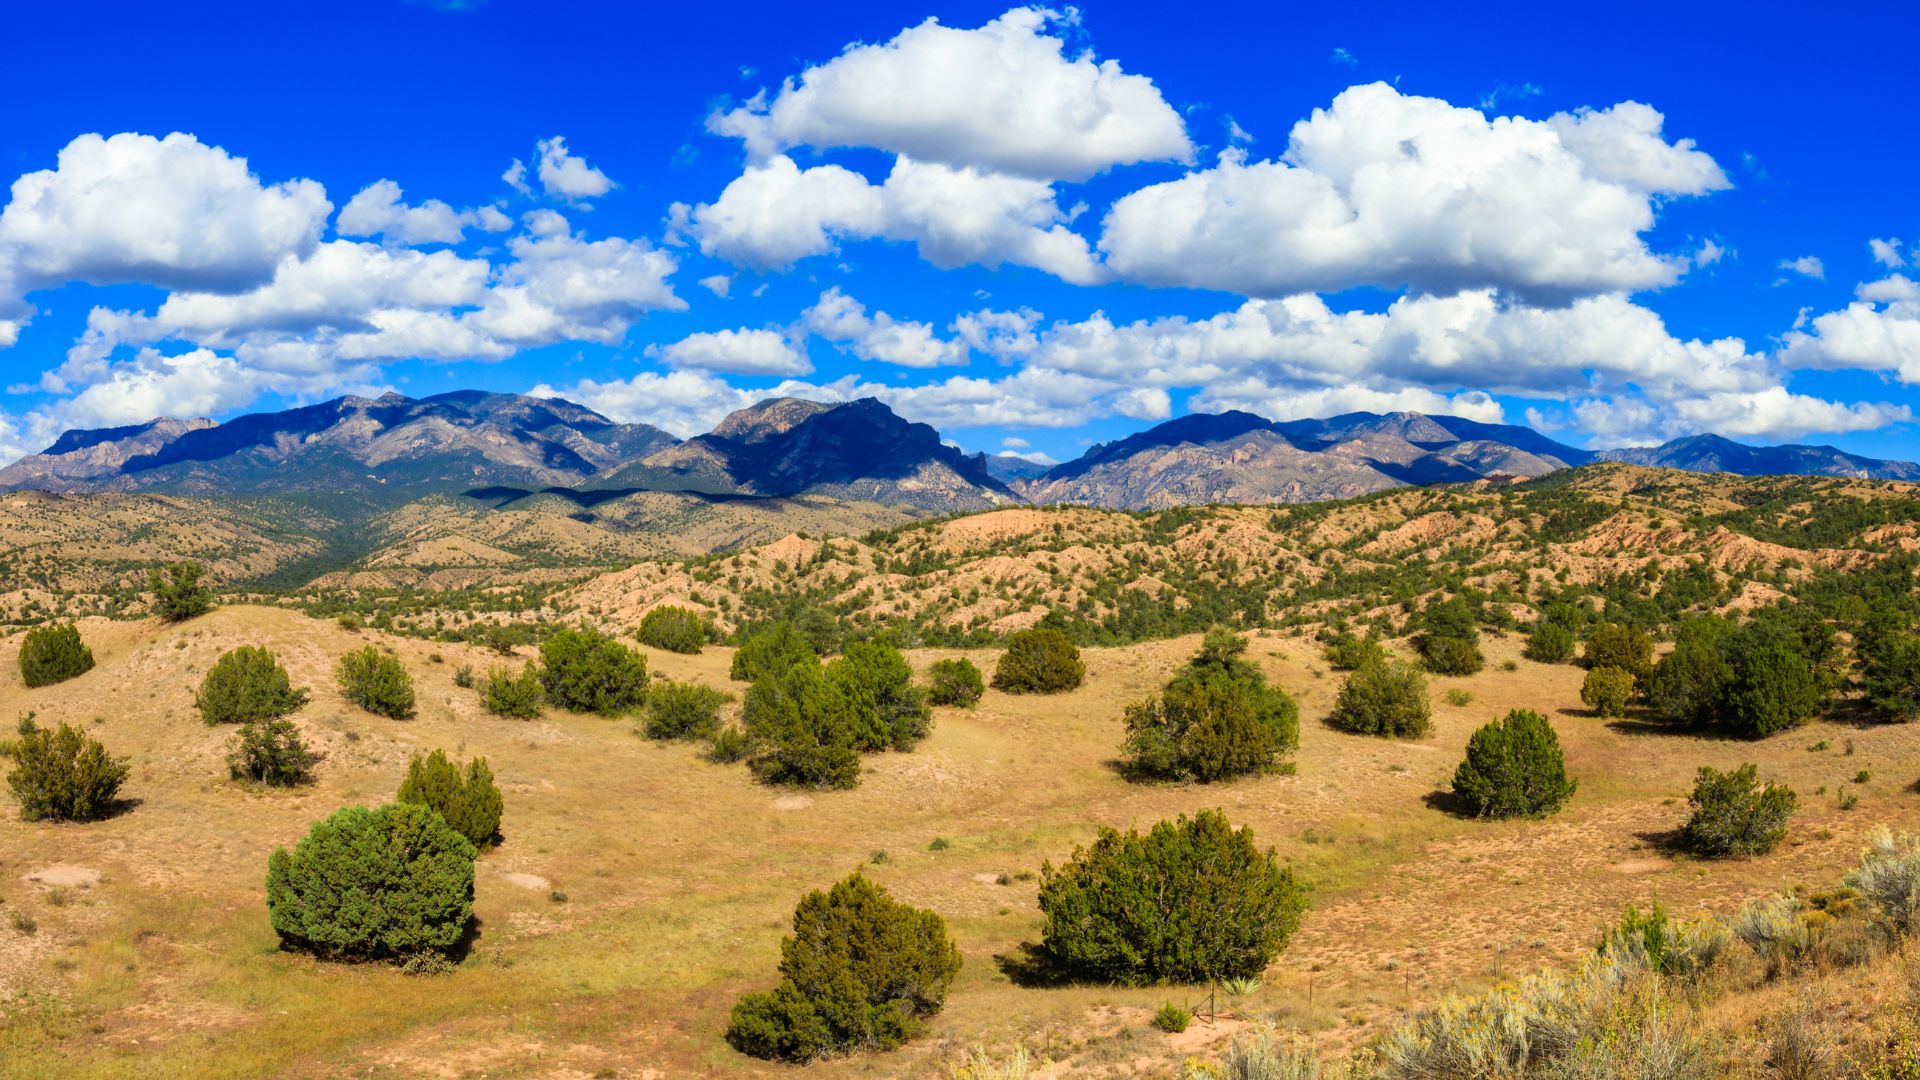 New Mexico foothills and mountains topped with green shrubs